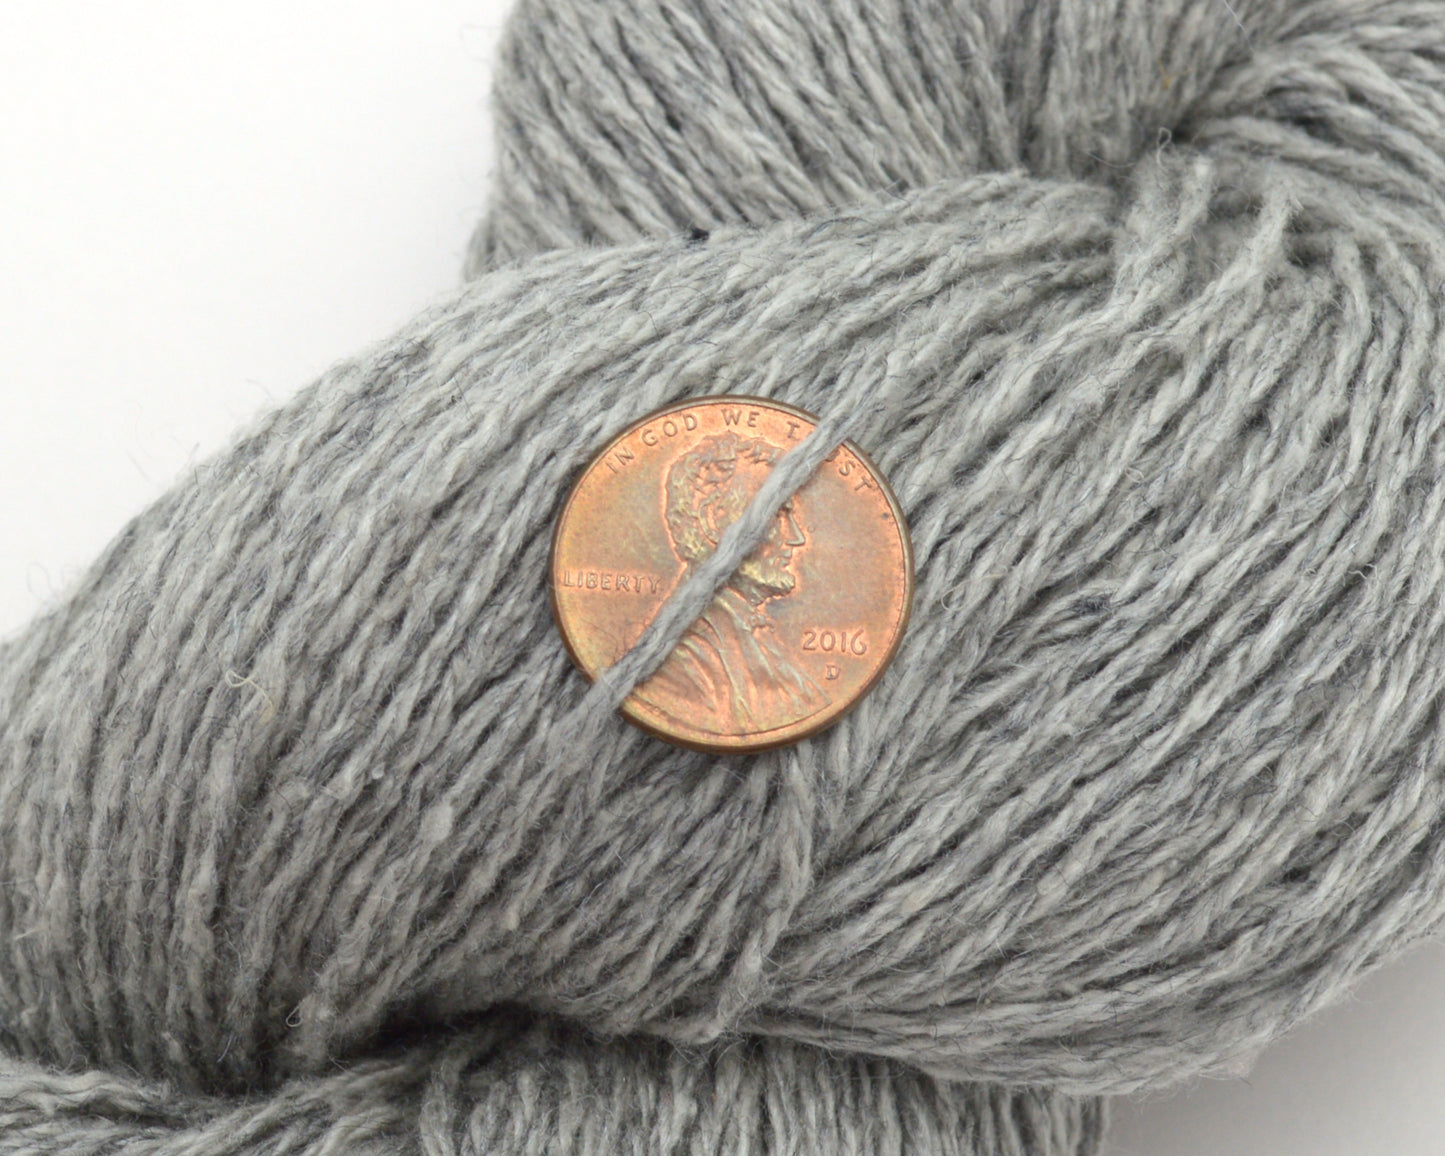 Fingering Weight Recycled Tussah Silk Yarn in Silver Gray